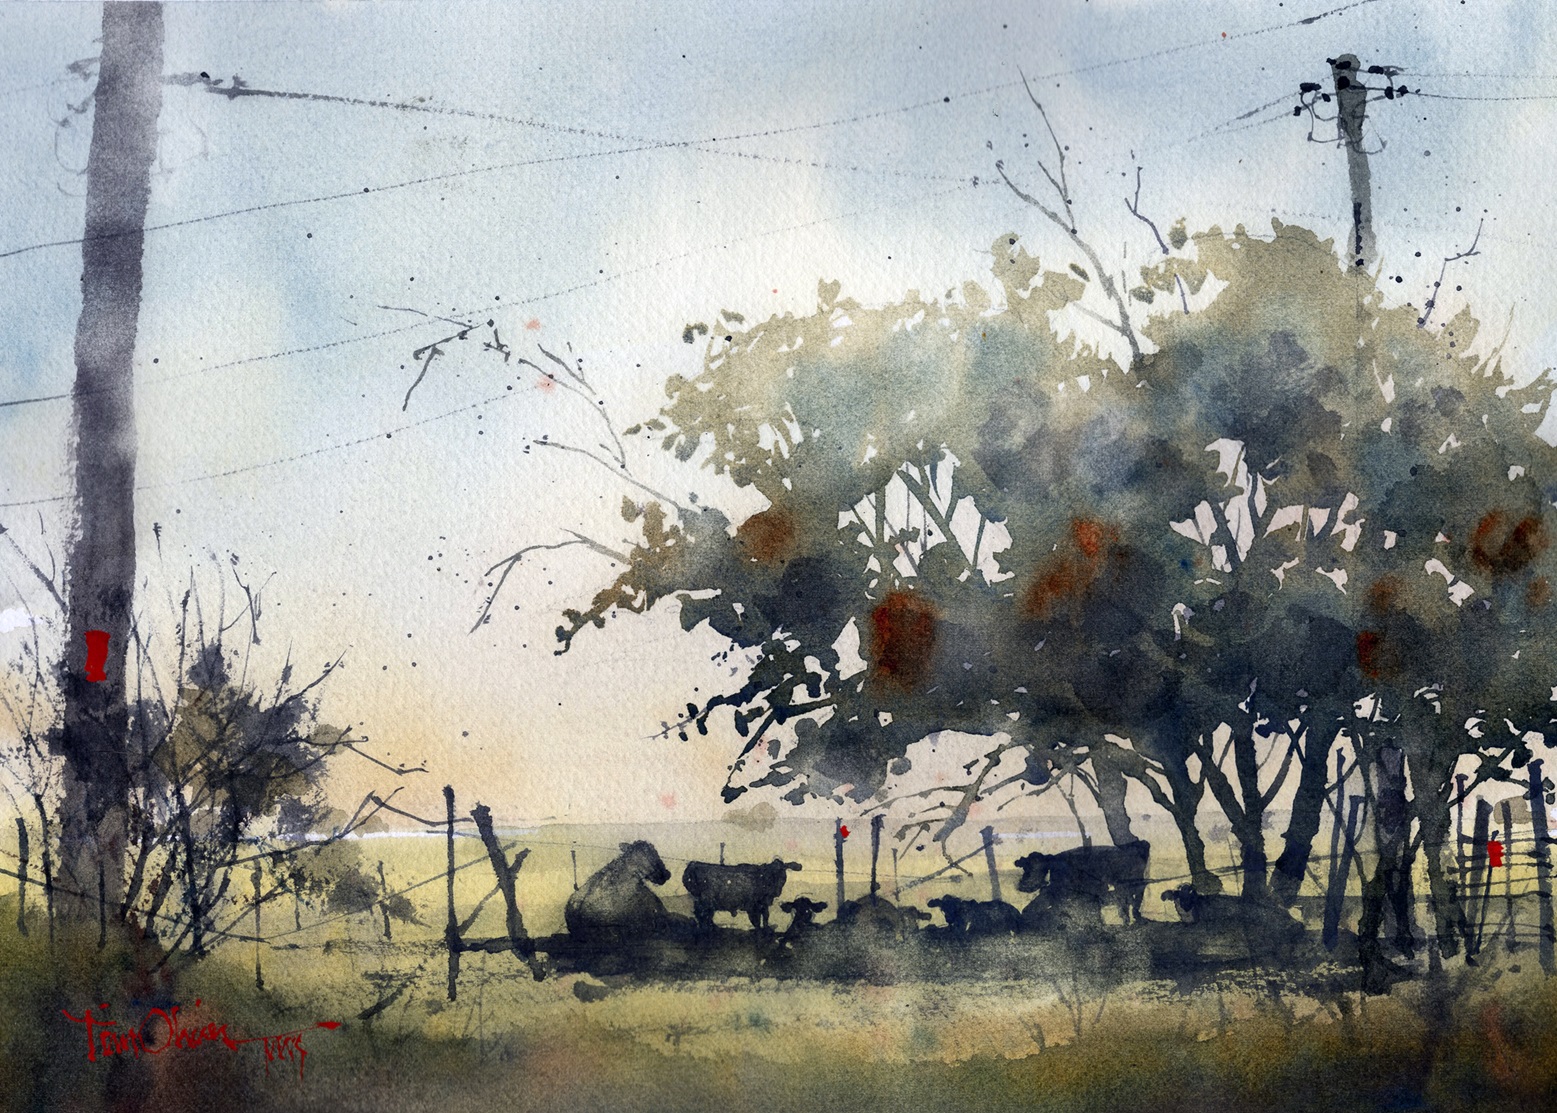 3. Midday downtime, plein air painting watercolor